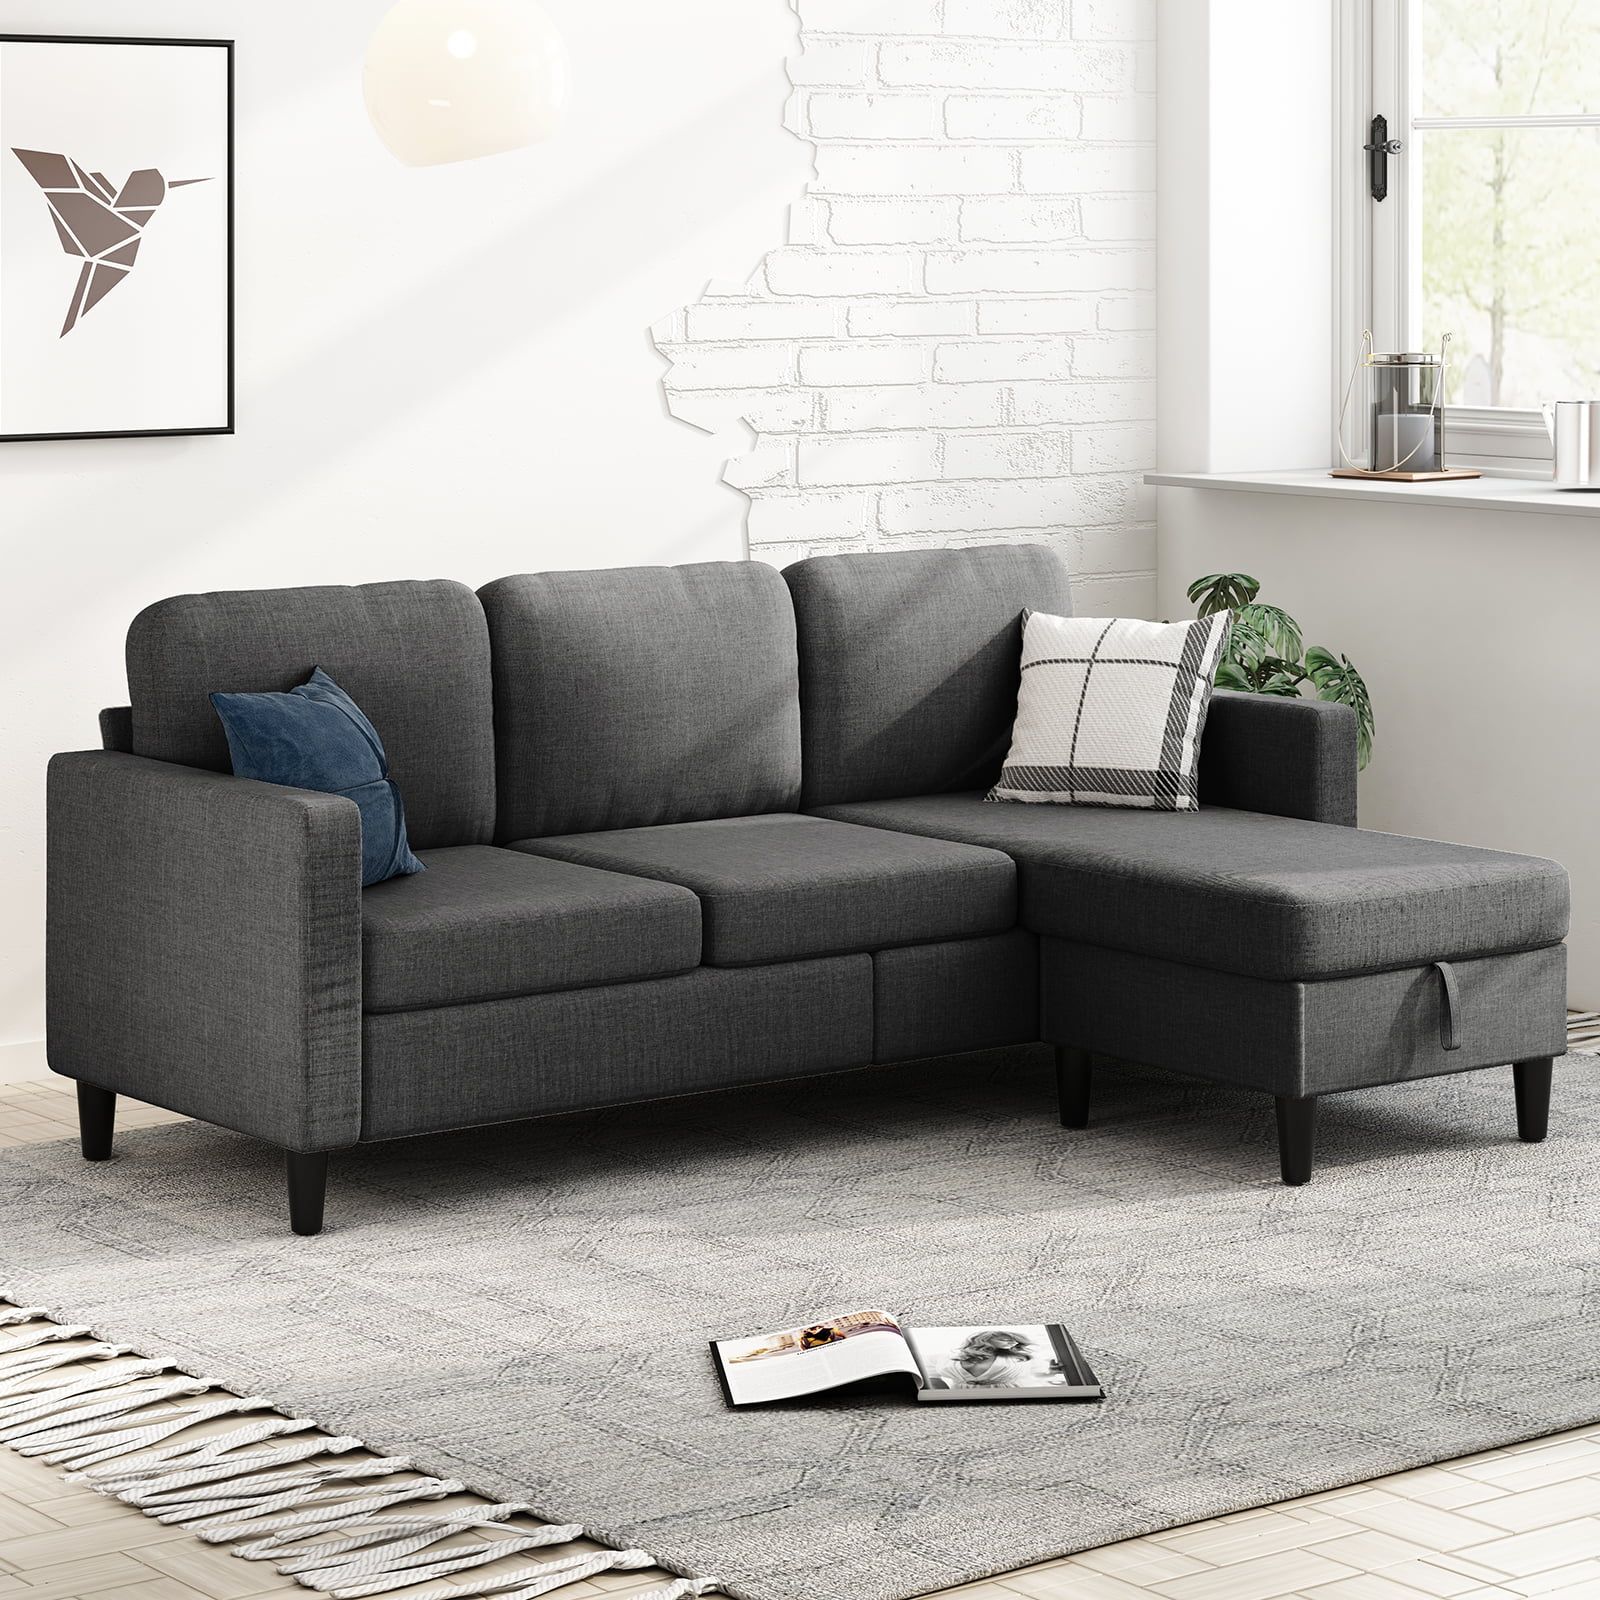 Muzz Sectional Sofa With Movable Ottoman, Free Combination Sectional Couch,  Small L Shaped Sectional Sofa With Storage Ottoman, Modern Linen Fabric  Sofa Set For Living Room (dark Grey) – Walmart With Regard To Modern Linen Fabric Sofa Sets (View 2 of 20)